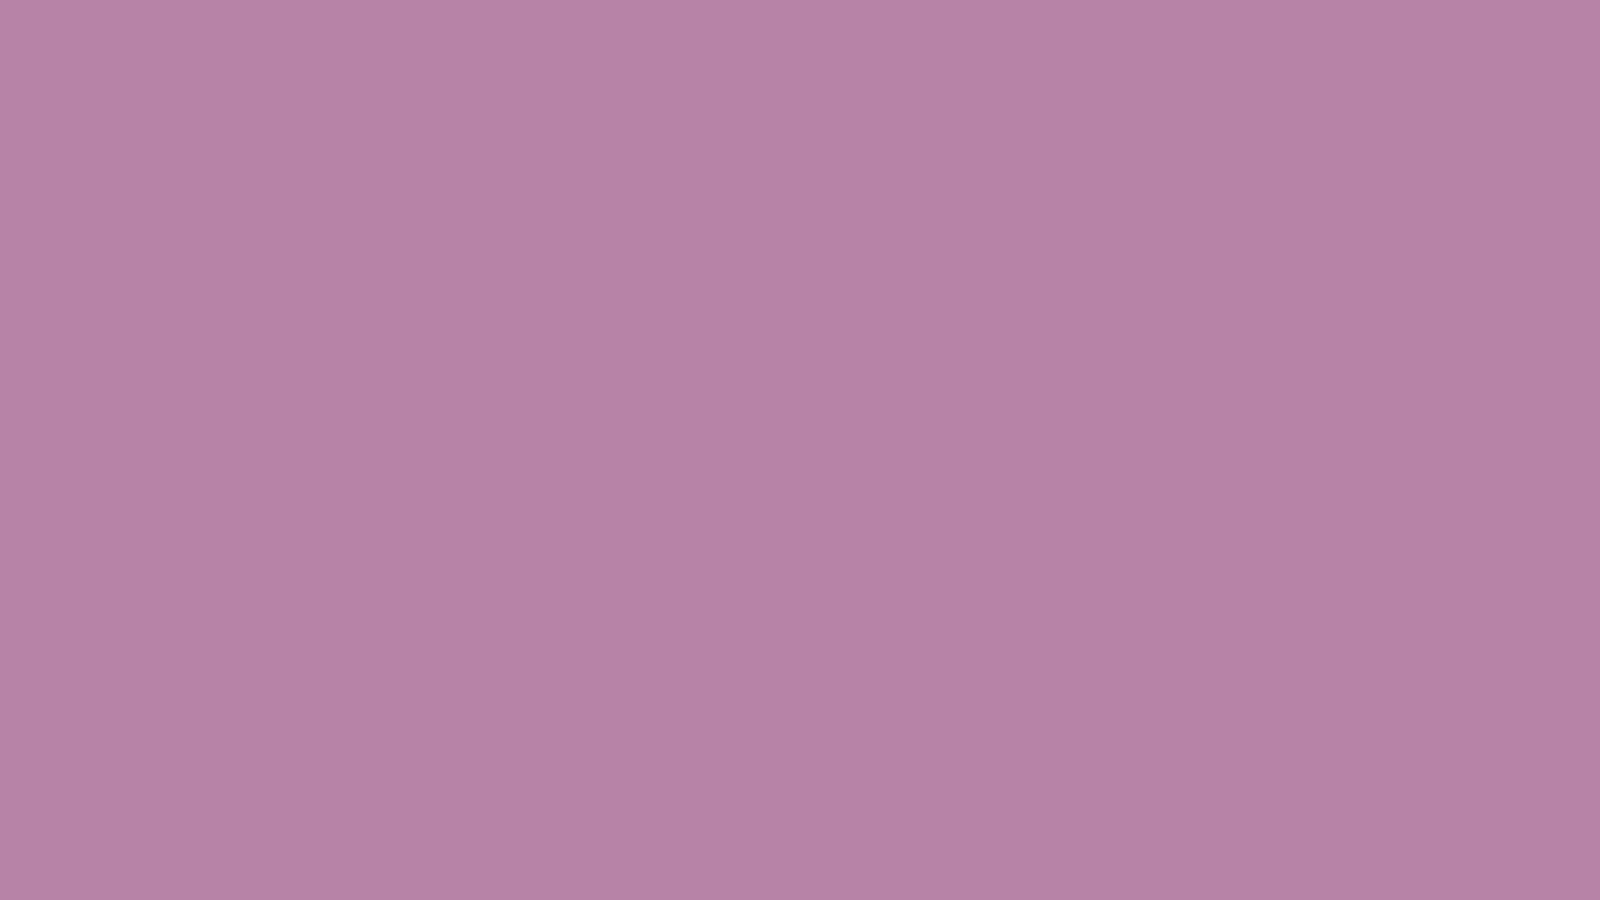 Mauve Color Submited Image